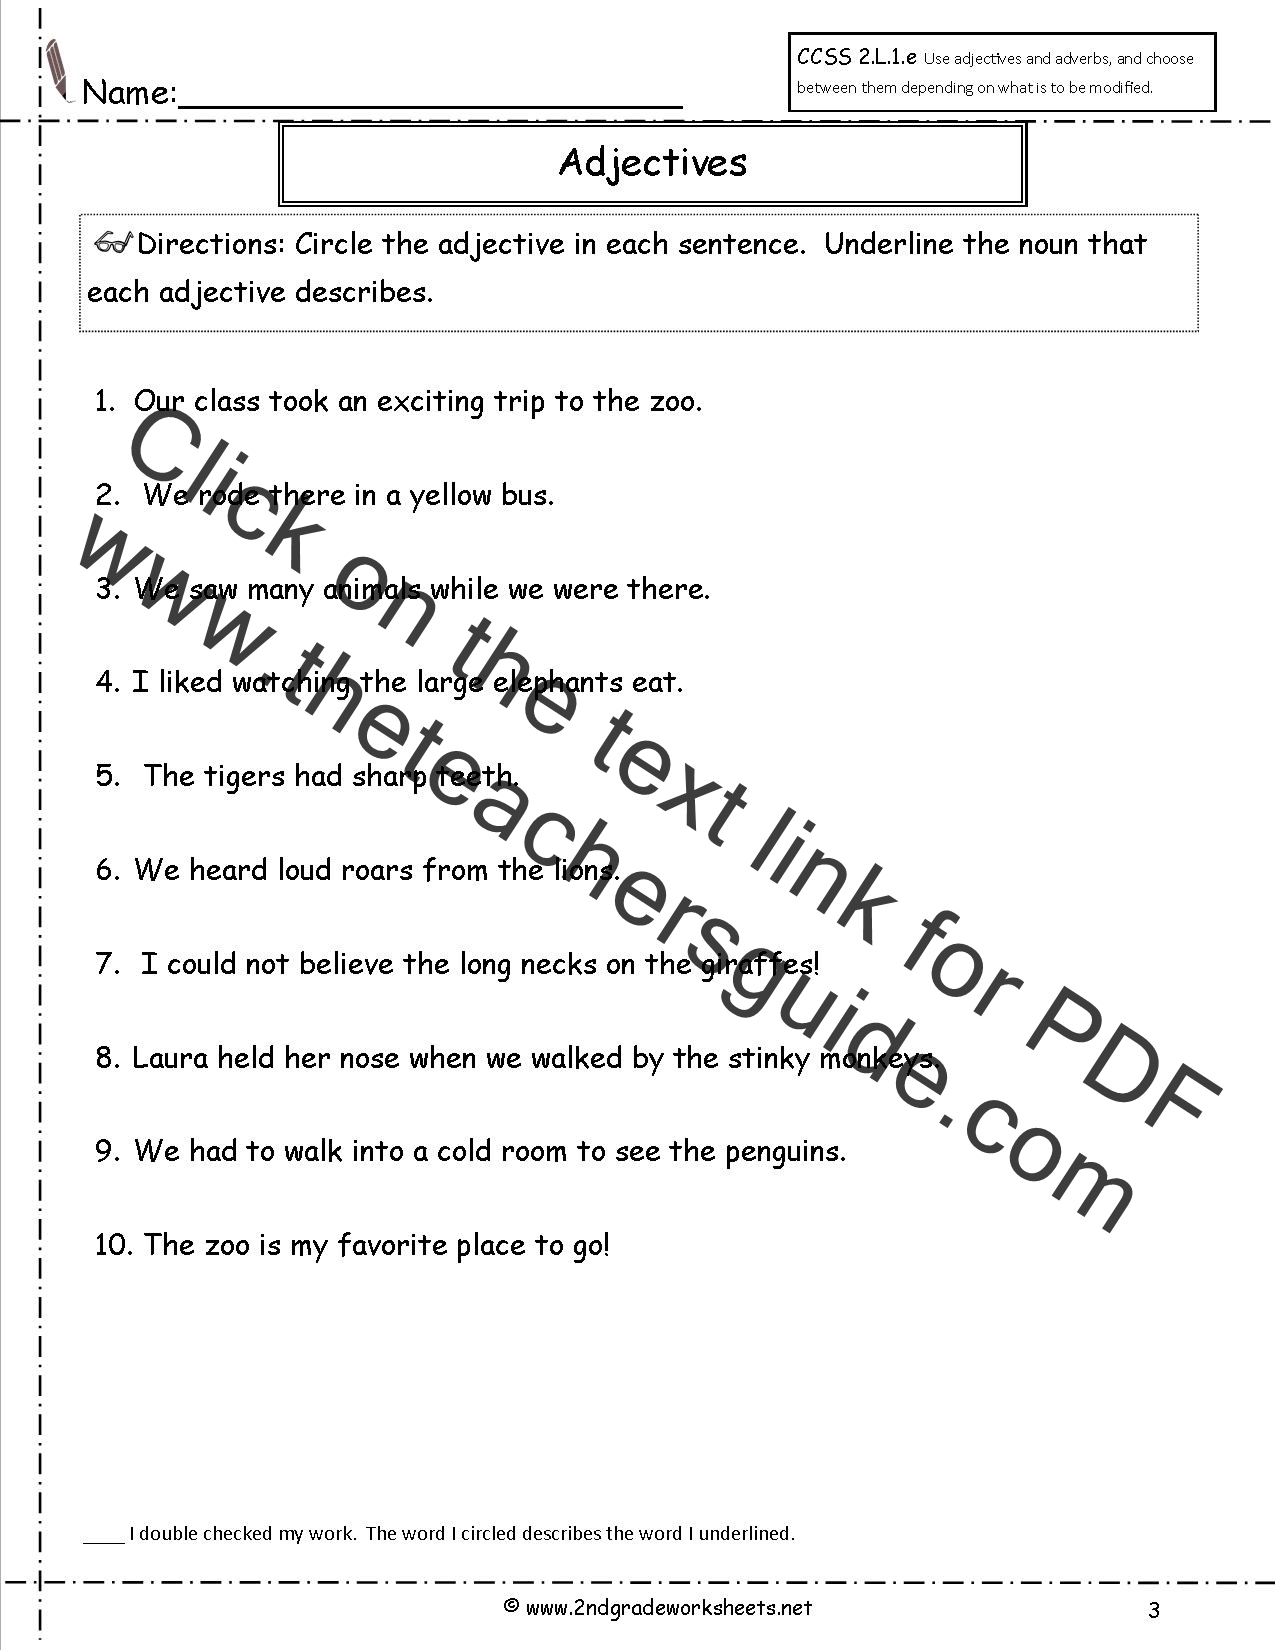 english-grammar-adjectives-english-grammar-worksheet-for-class-3-the-order-of-adjectives